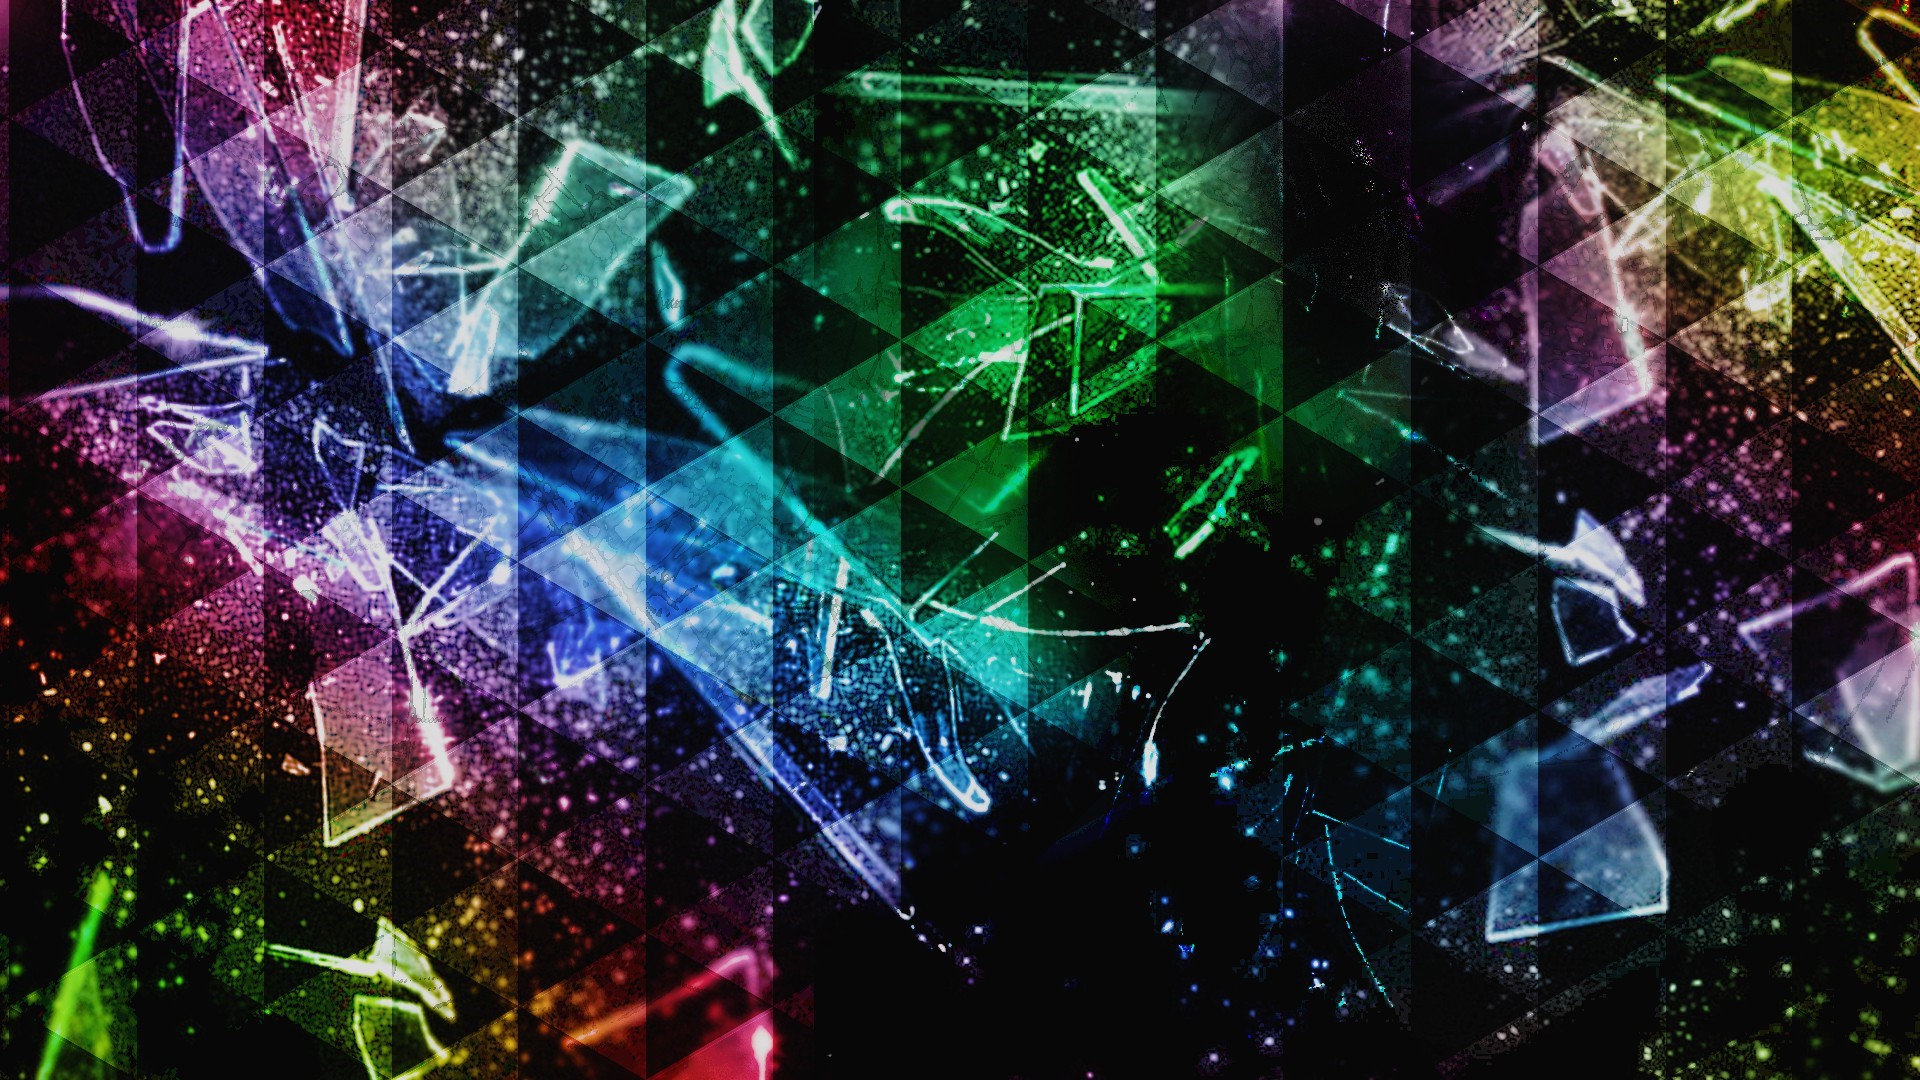 1920x1080 abstract colorful triangle shattered broken glass wallpaper JPG 595 kB. Mocah HD Wallpaper